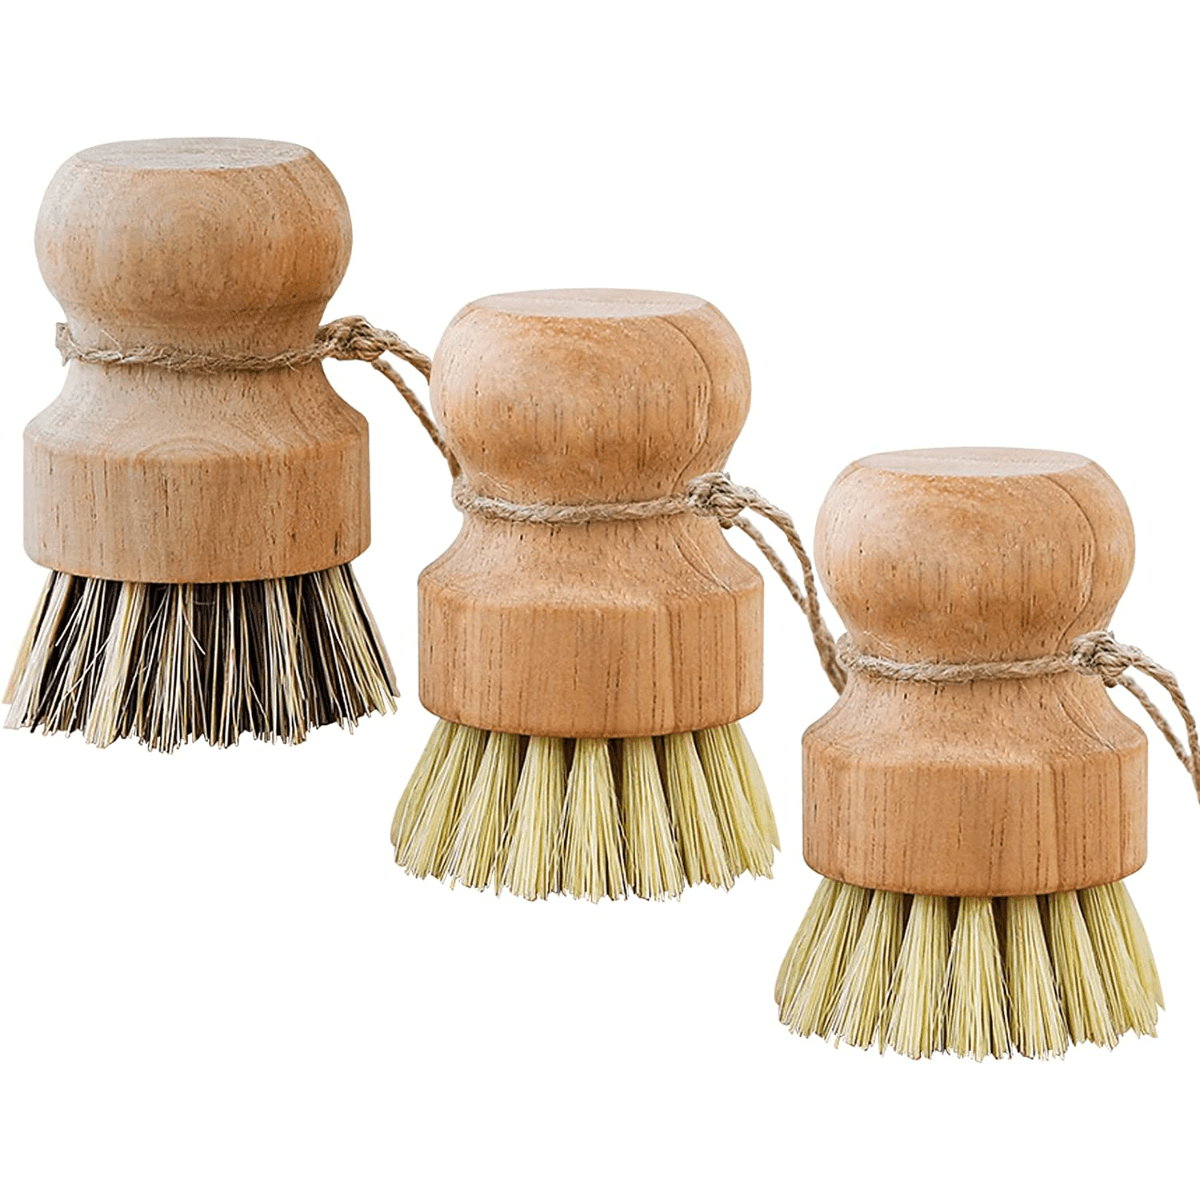 2pcs Wooden Pot Brush - Round Mini Dish Brush Natural Scrub Brush Durable Scrubber  Cleaning Kit for Cleaning Pots, Pans and Vegetables